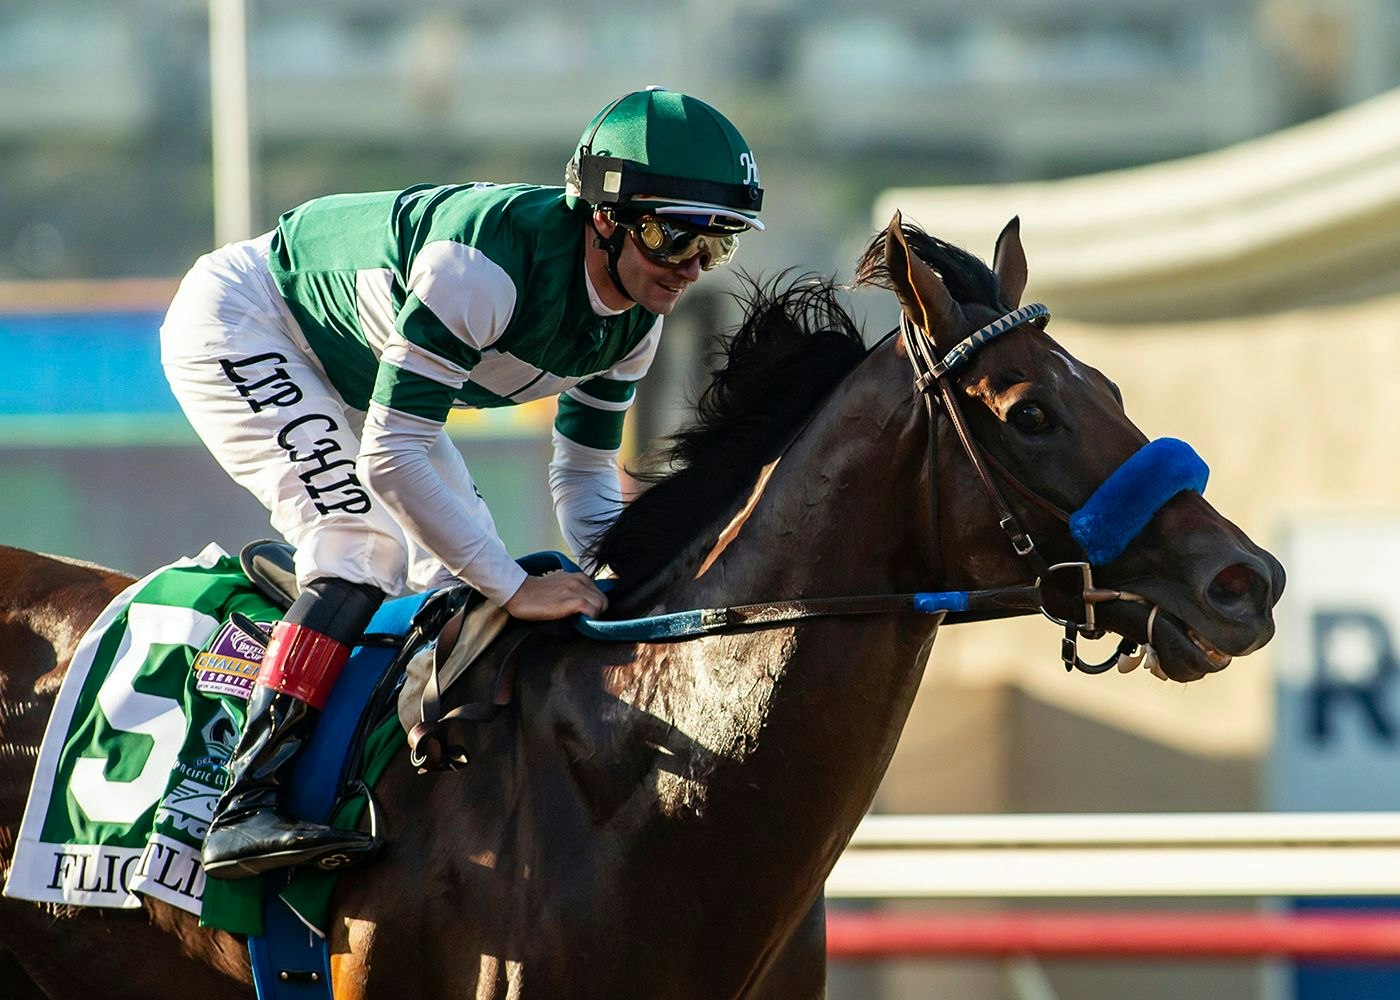 Meet the 2022 Breeders' Cup Classic contenders The TwinSpires Edge